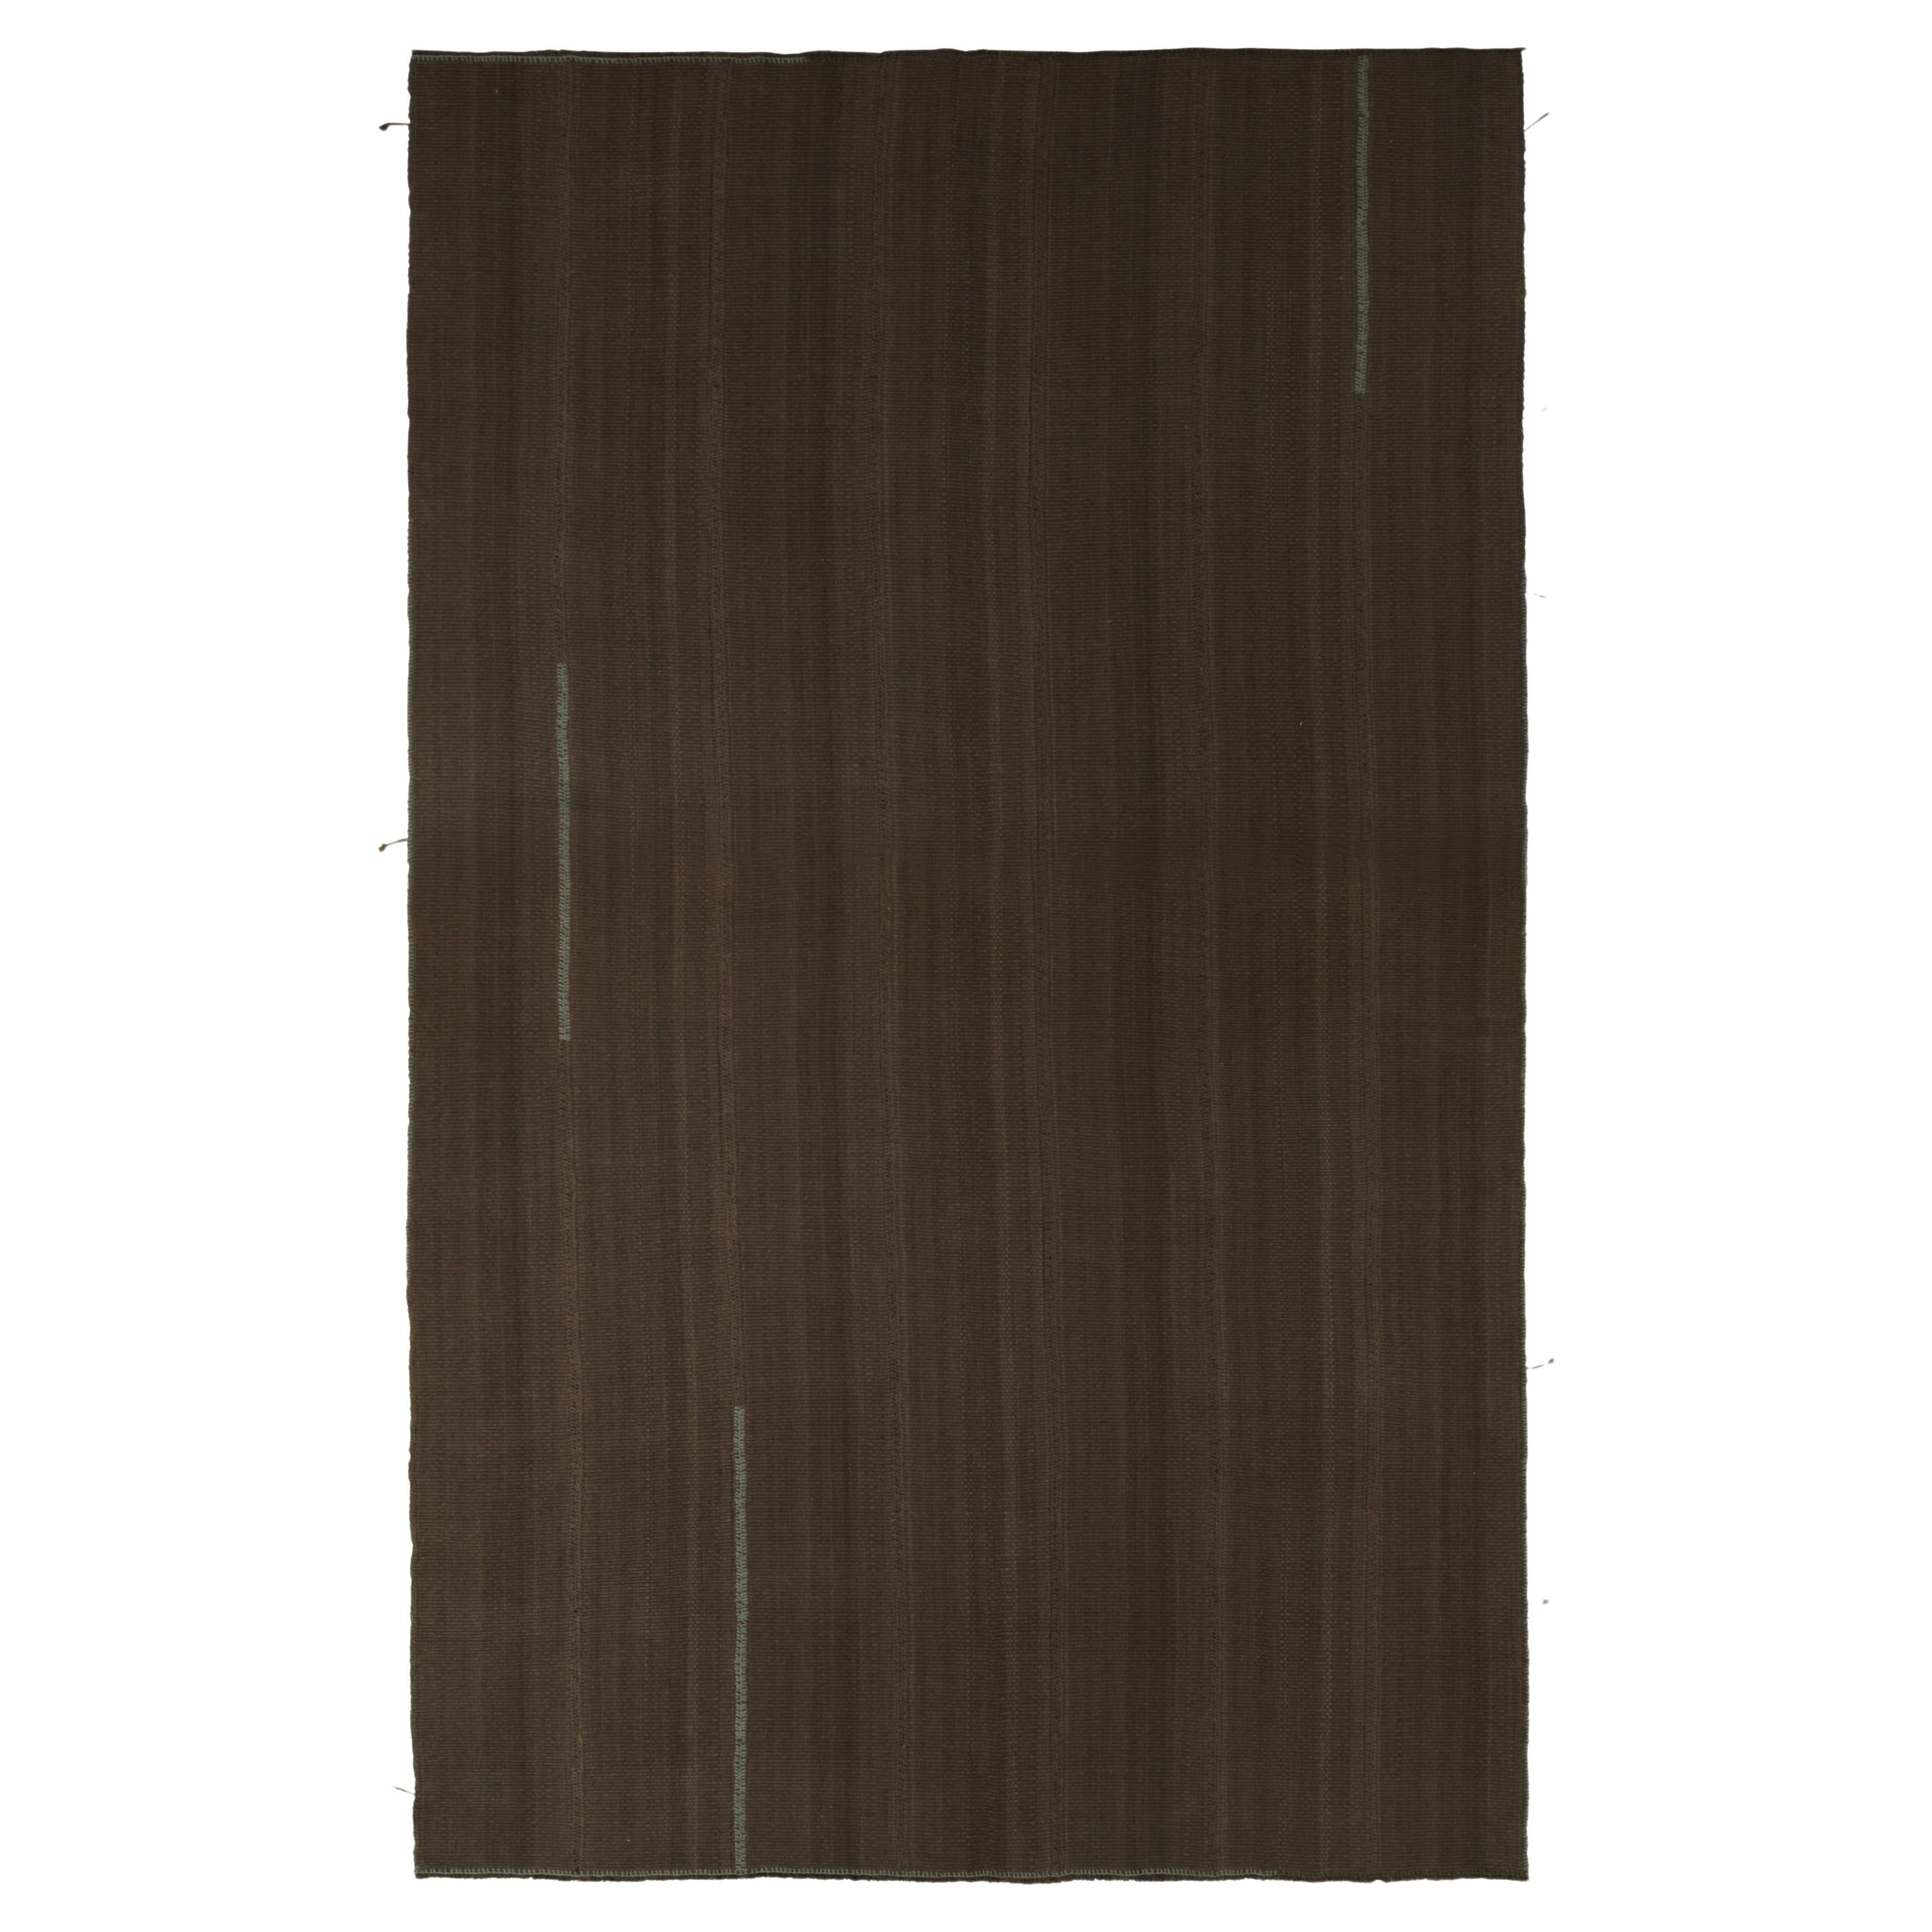 Rug & Kilim’s Contemporary Oversized Kilim in Brown Muted Stripes, Blue Accents For Sale